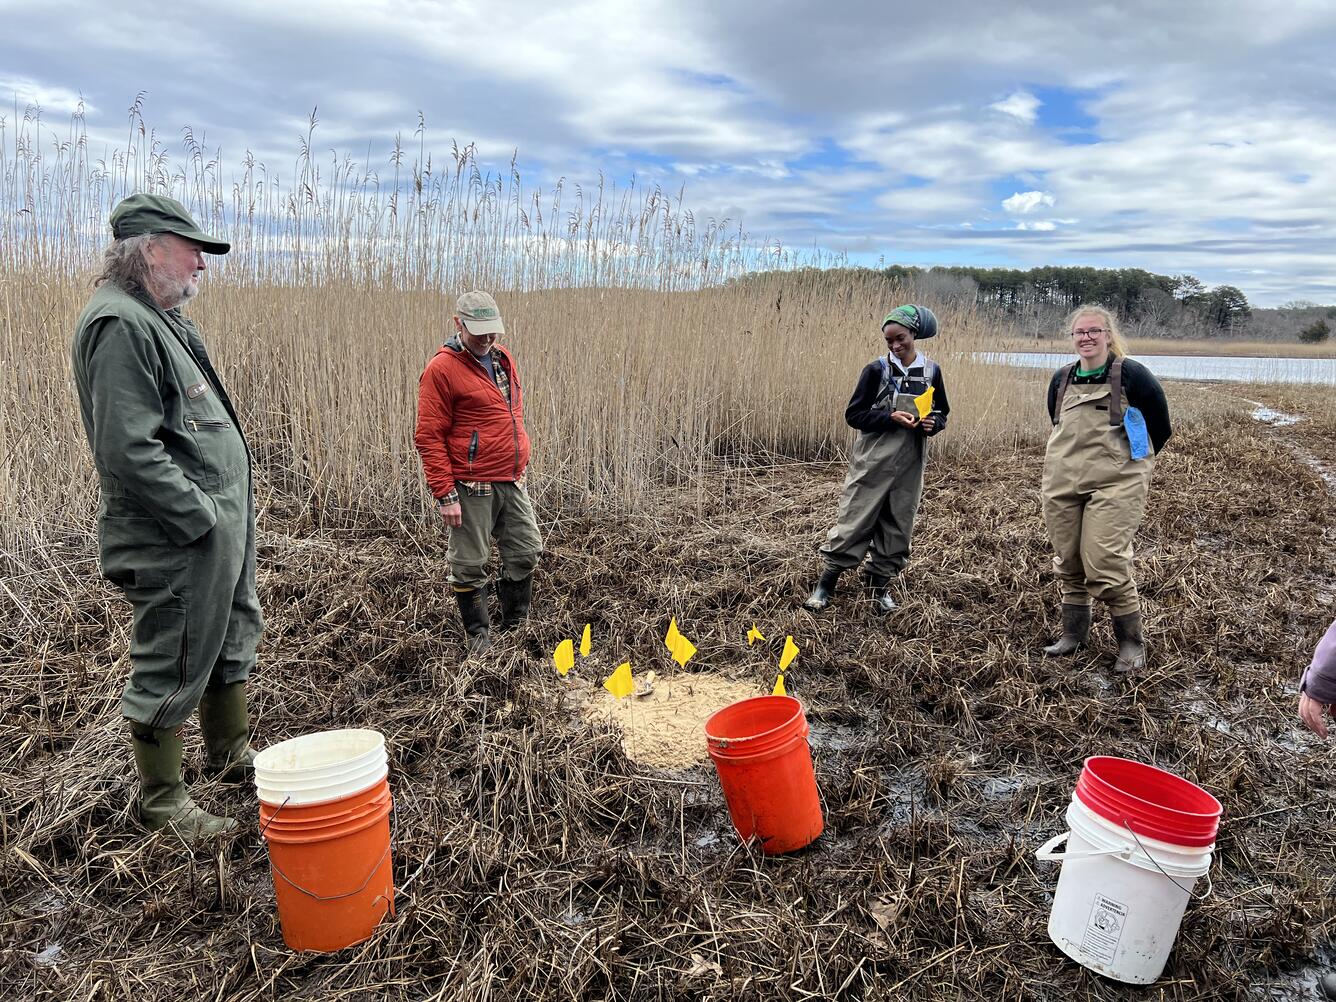 Four people in a wetland, phragmites in the background, three buckets on the ground and a circle made with yellow flags